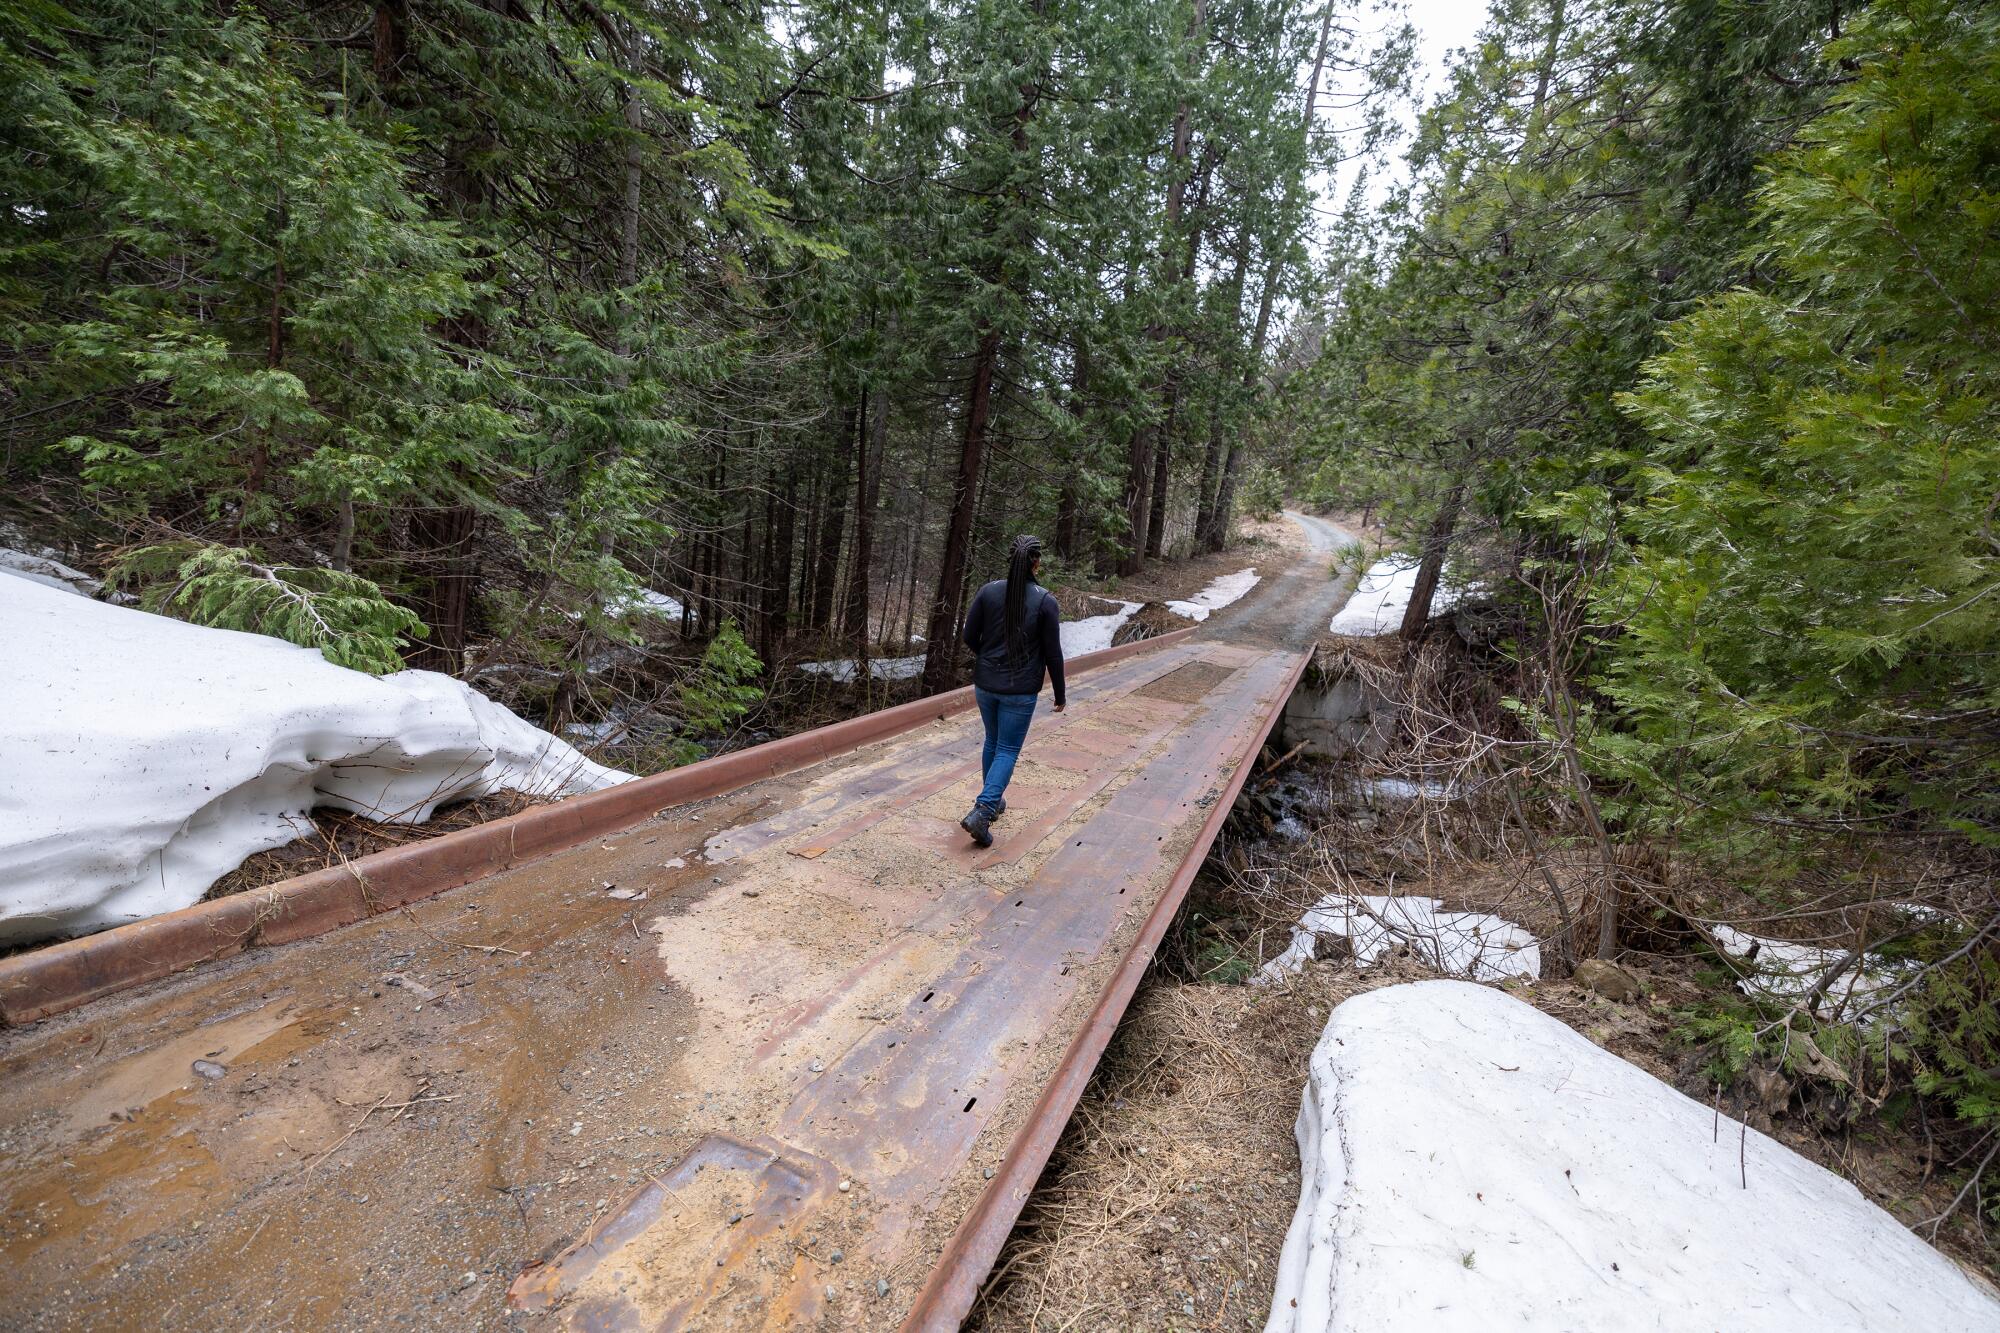 A woman walks over a bridge on a forested path.